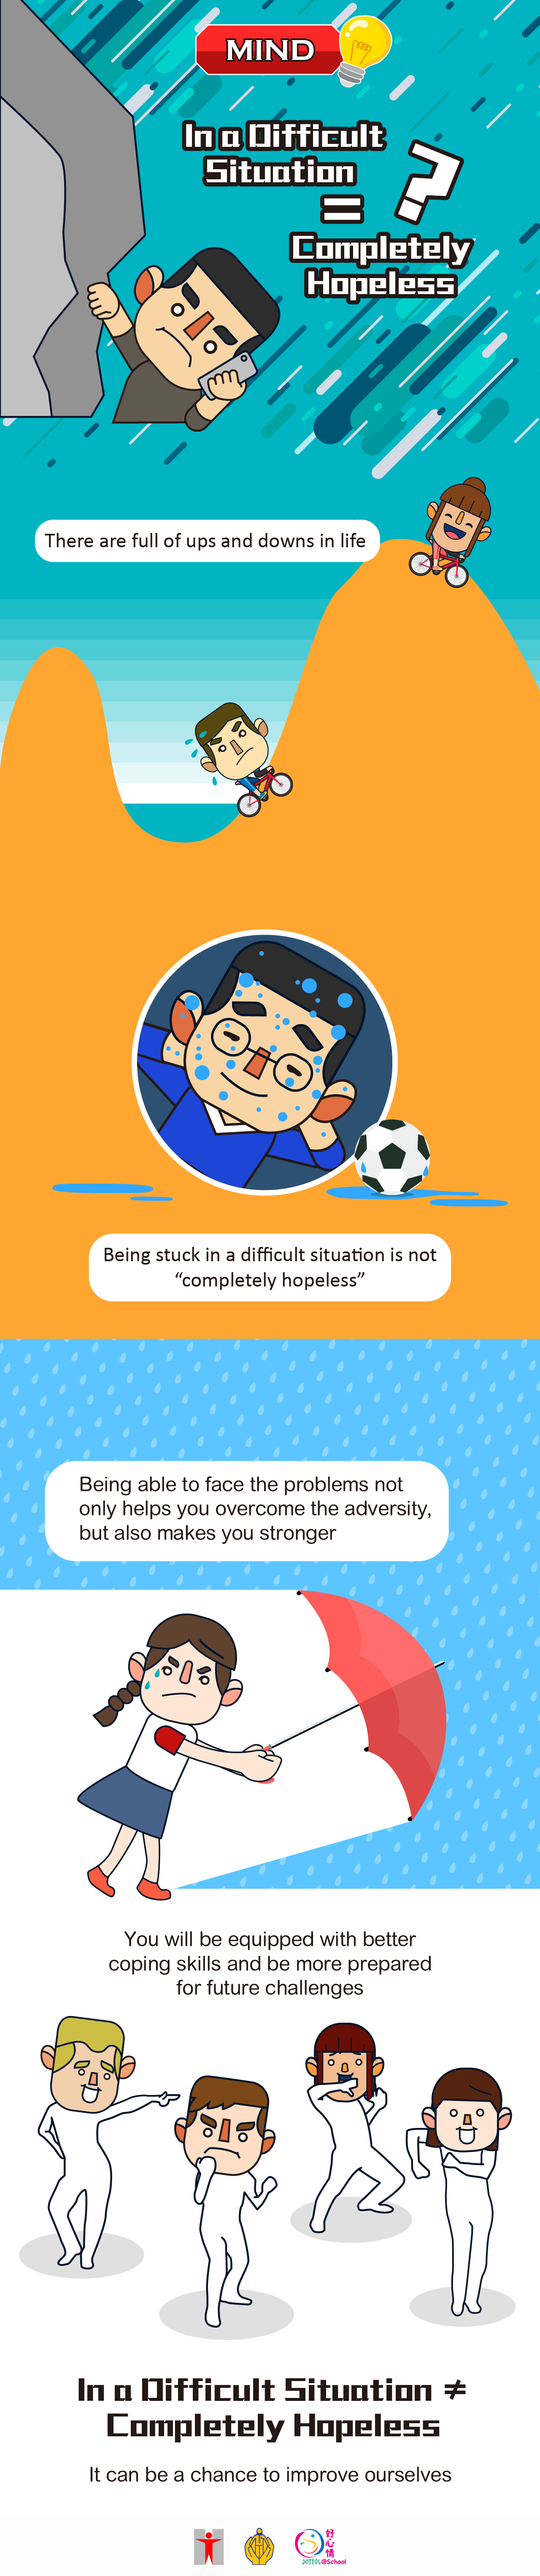 (Info graphic) In a Difficult Situation = Completely Hopeless? There are full of ups and downs in life. Being stuck in a difficult situation is not “completely hopeless”. Being able to face the problems not only helps you overcome the adversity, but also makes you stronger. You will be equipped with better coping skills and be more prepared for future challenges. In a Difficult Situation ≠ Completely Hopeless. It can be a chance to improve ourselves